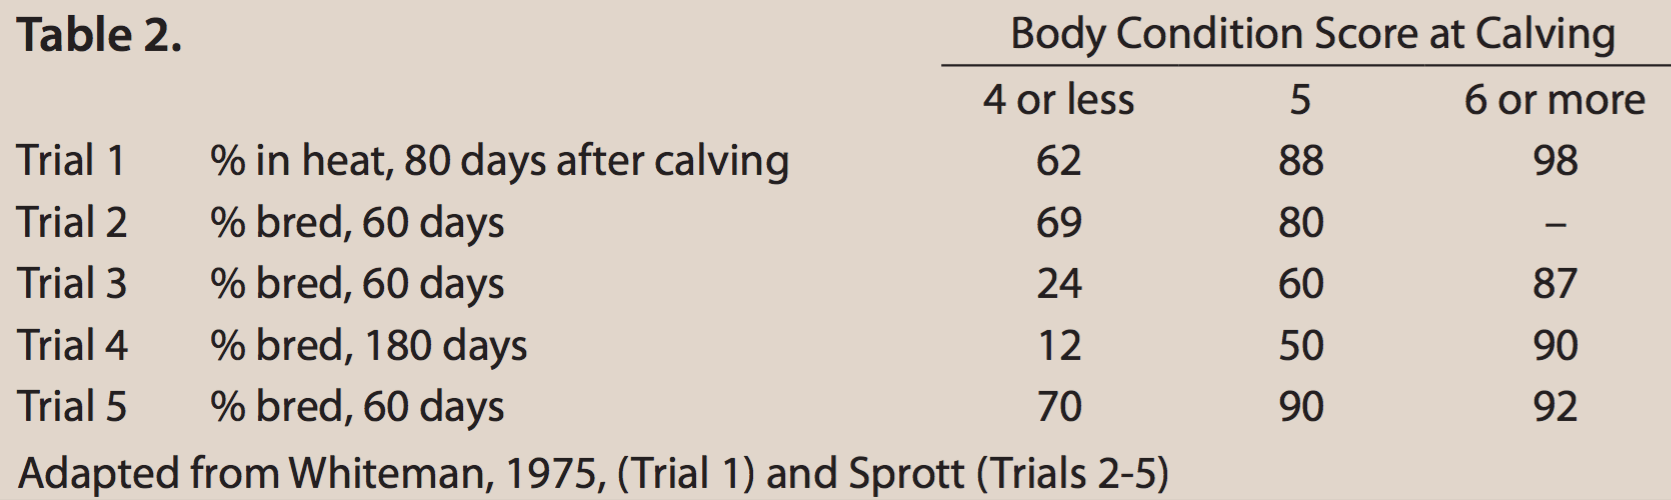 Table 2. Body Condition Score at Calving